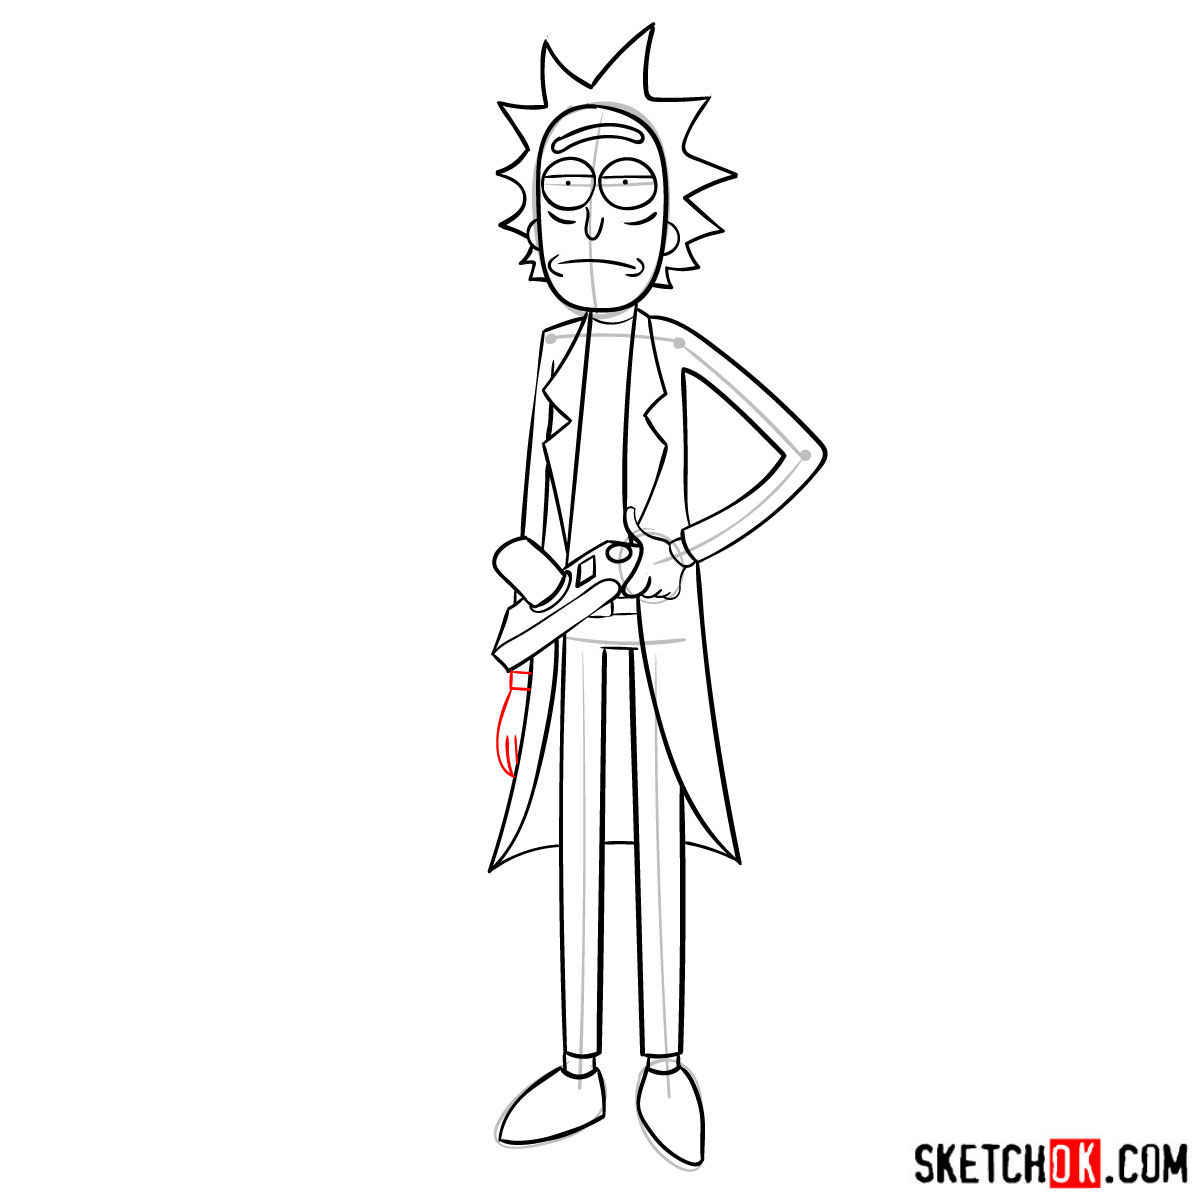 How to draw Rick Sanchez (Rick and Morty) - step 12